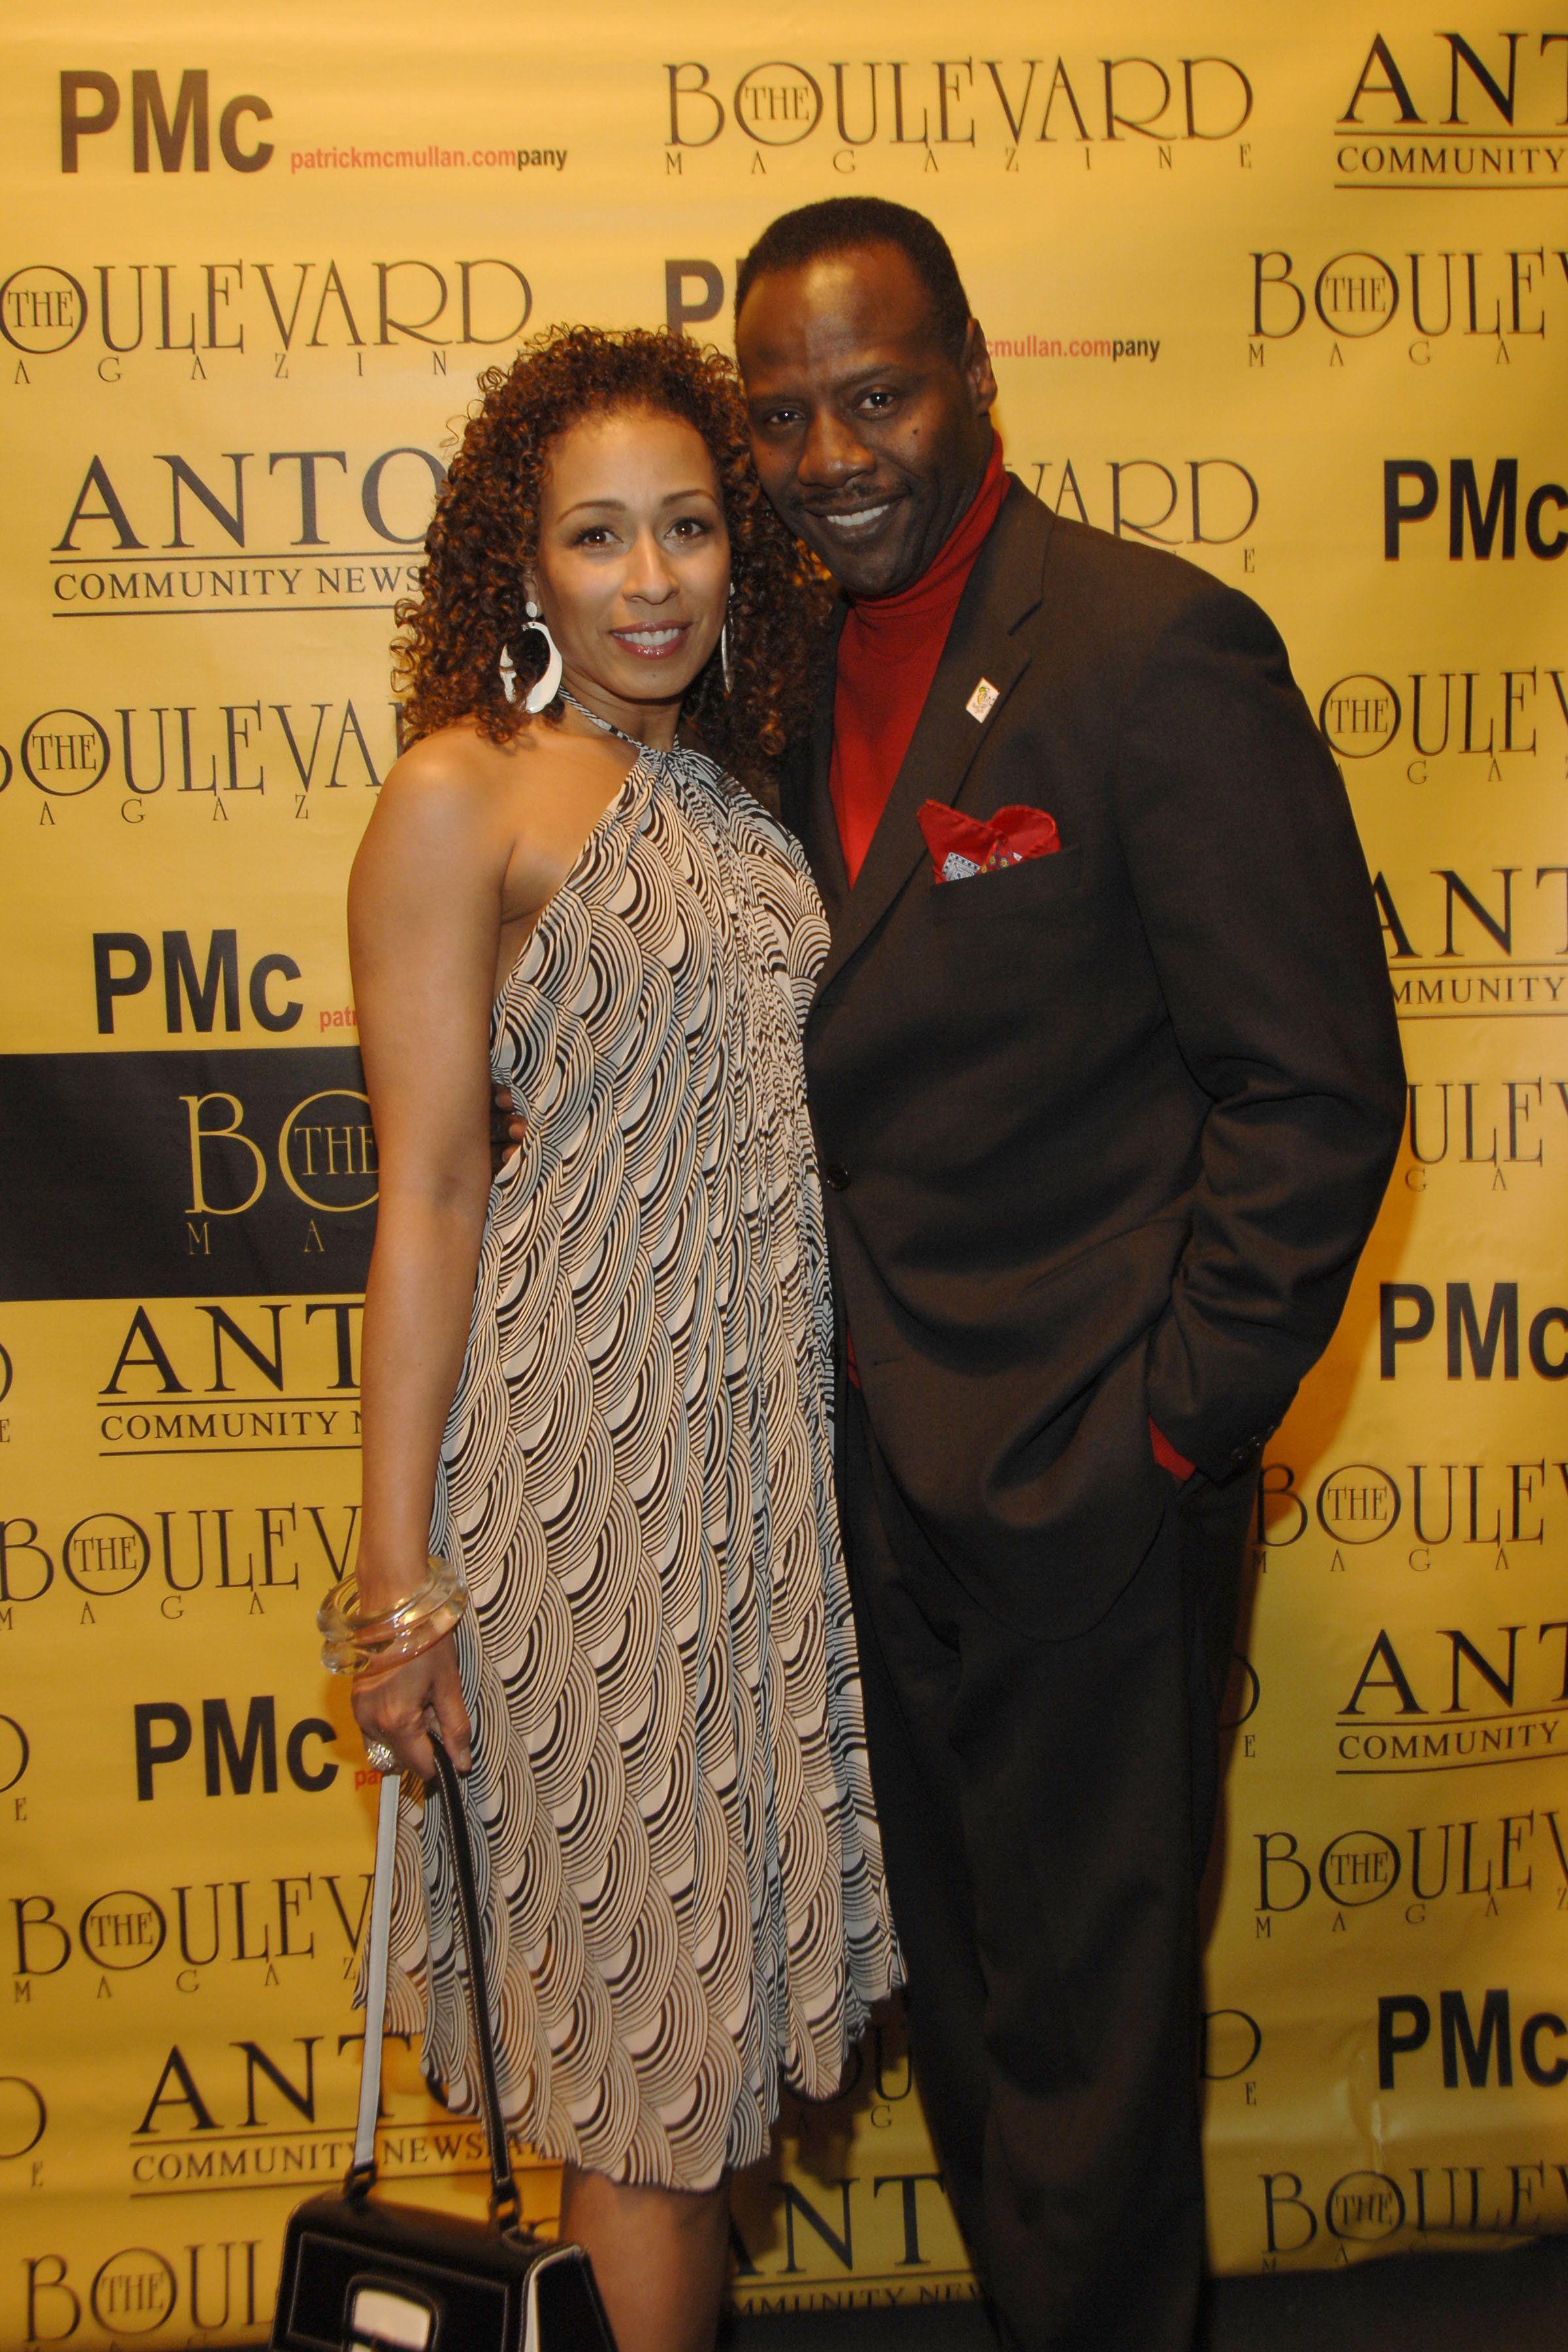 Tamara Tunie and Gregory Generet attend BOULEVARD MAGAZINE Celebrates their April Issue at Hawaiian Tropic Zone on April 14, 2008 in New York City. | Photo: Getty Images